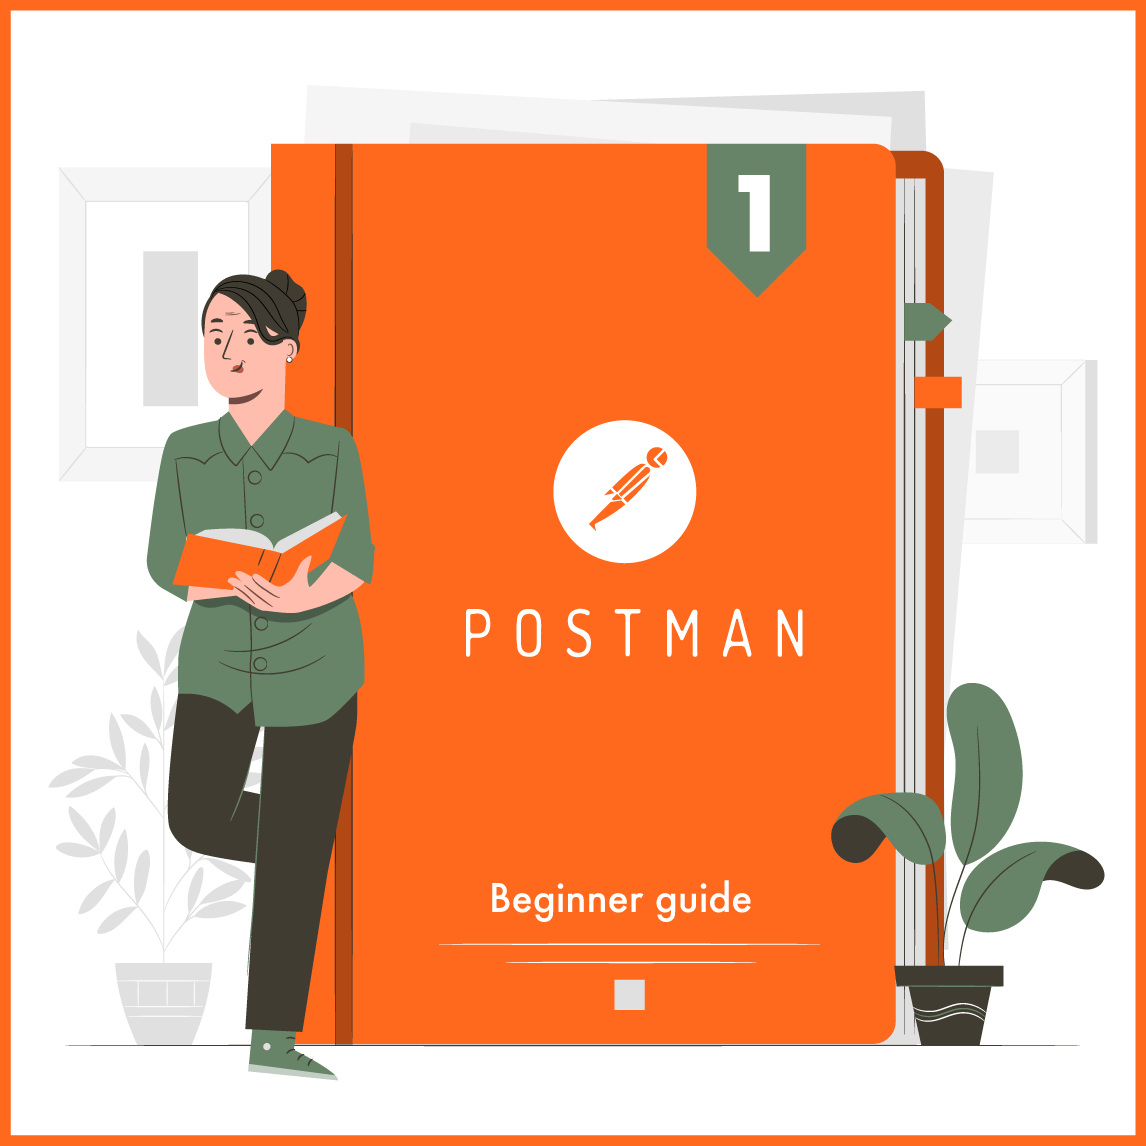 Postman: a quick guide for beginners